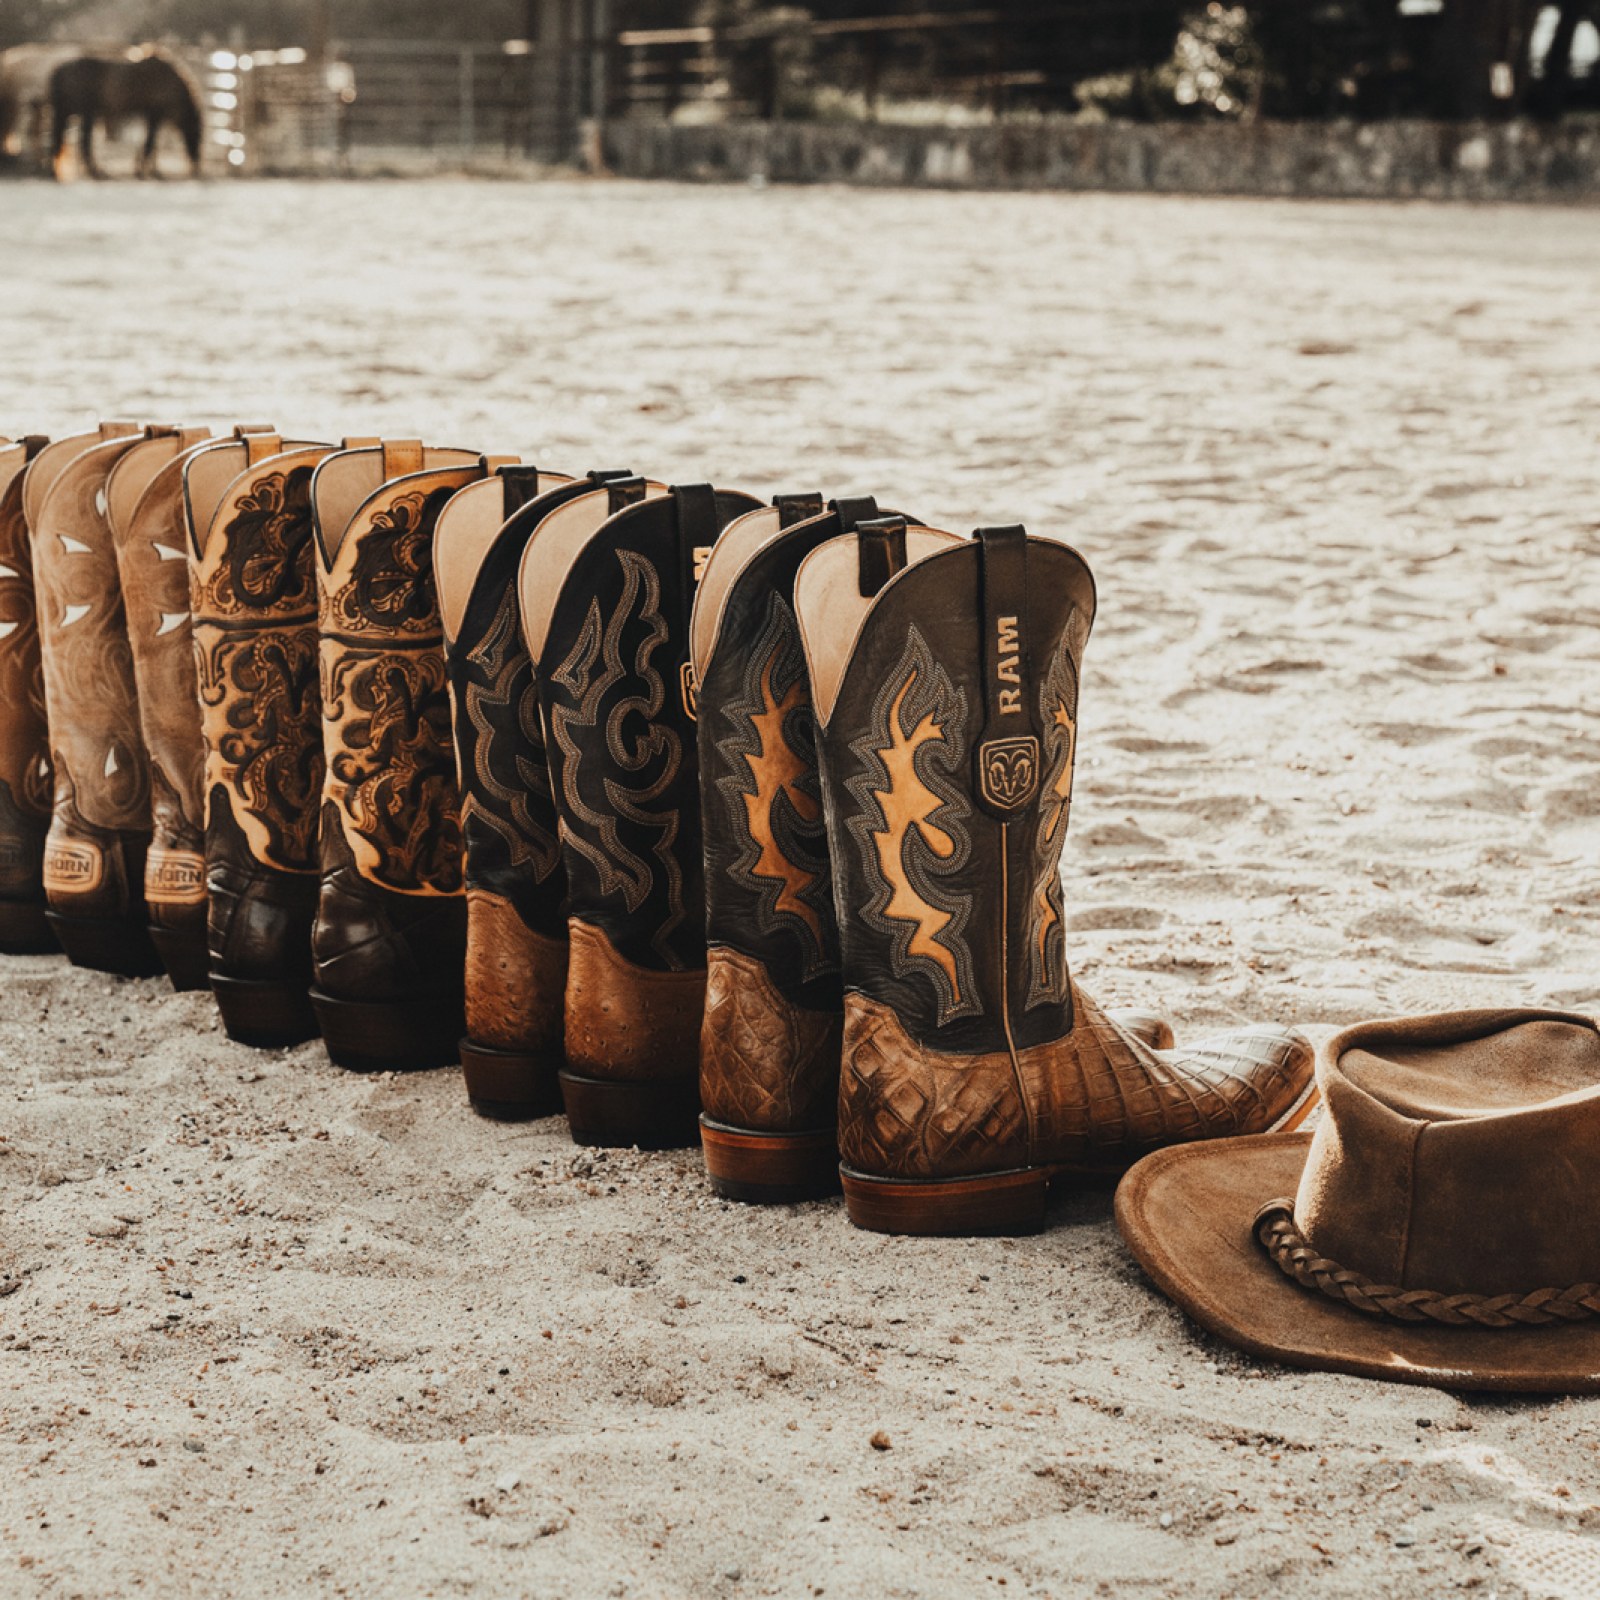 Ram Trucks, Lucchese Team Up for Unique Branded Boot Line